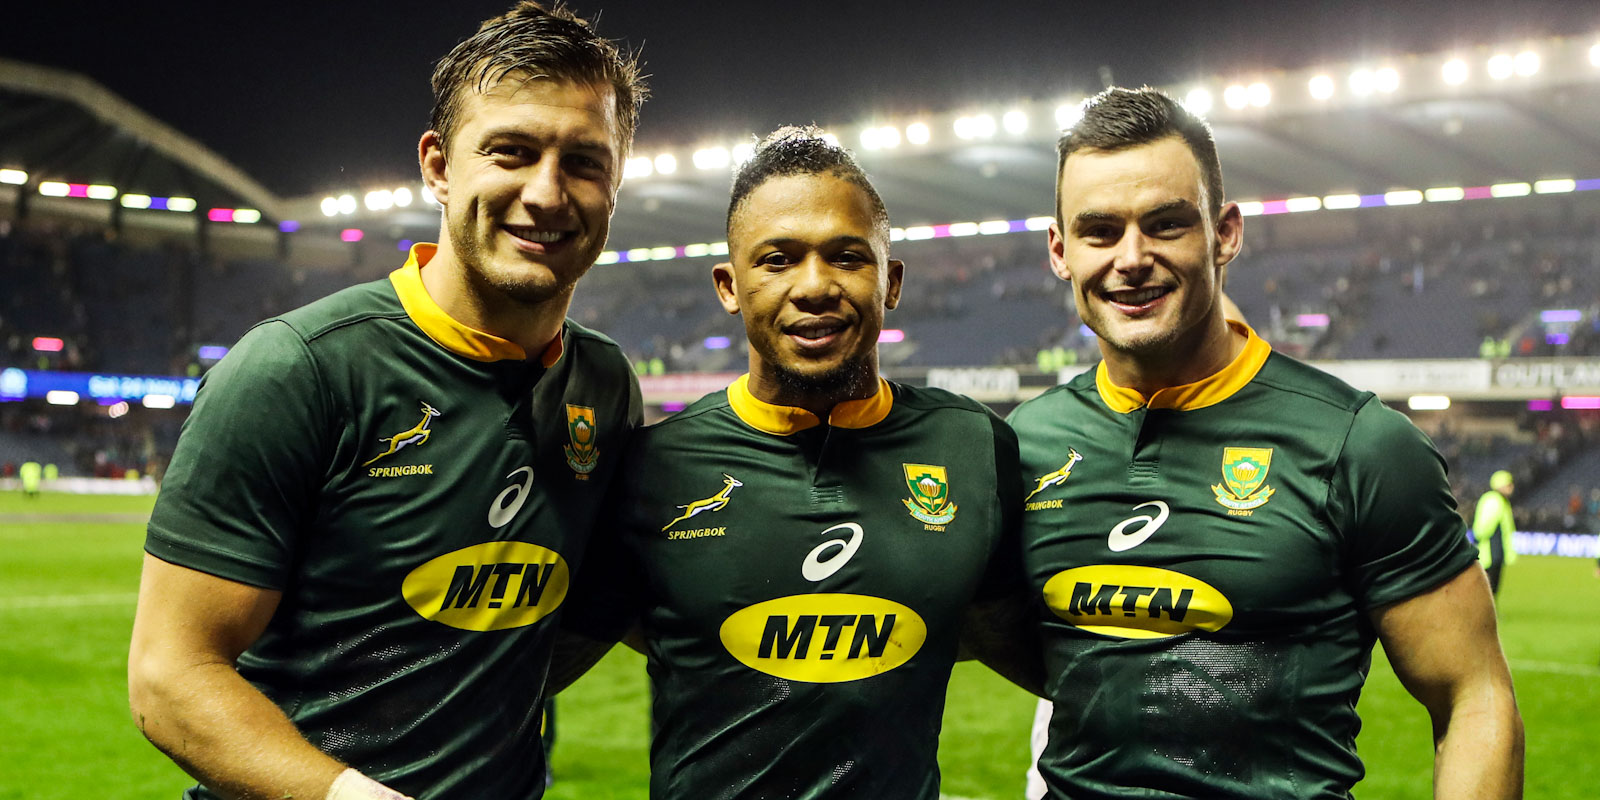 Handre Pollard, Elton Jantjies and Jesse Kriel were all included in the match-23 to face Georgia on Friday.